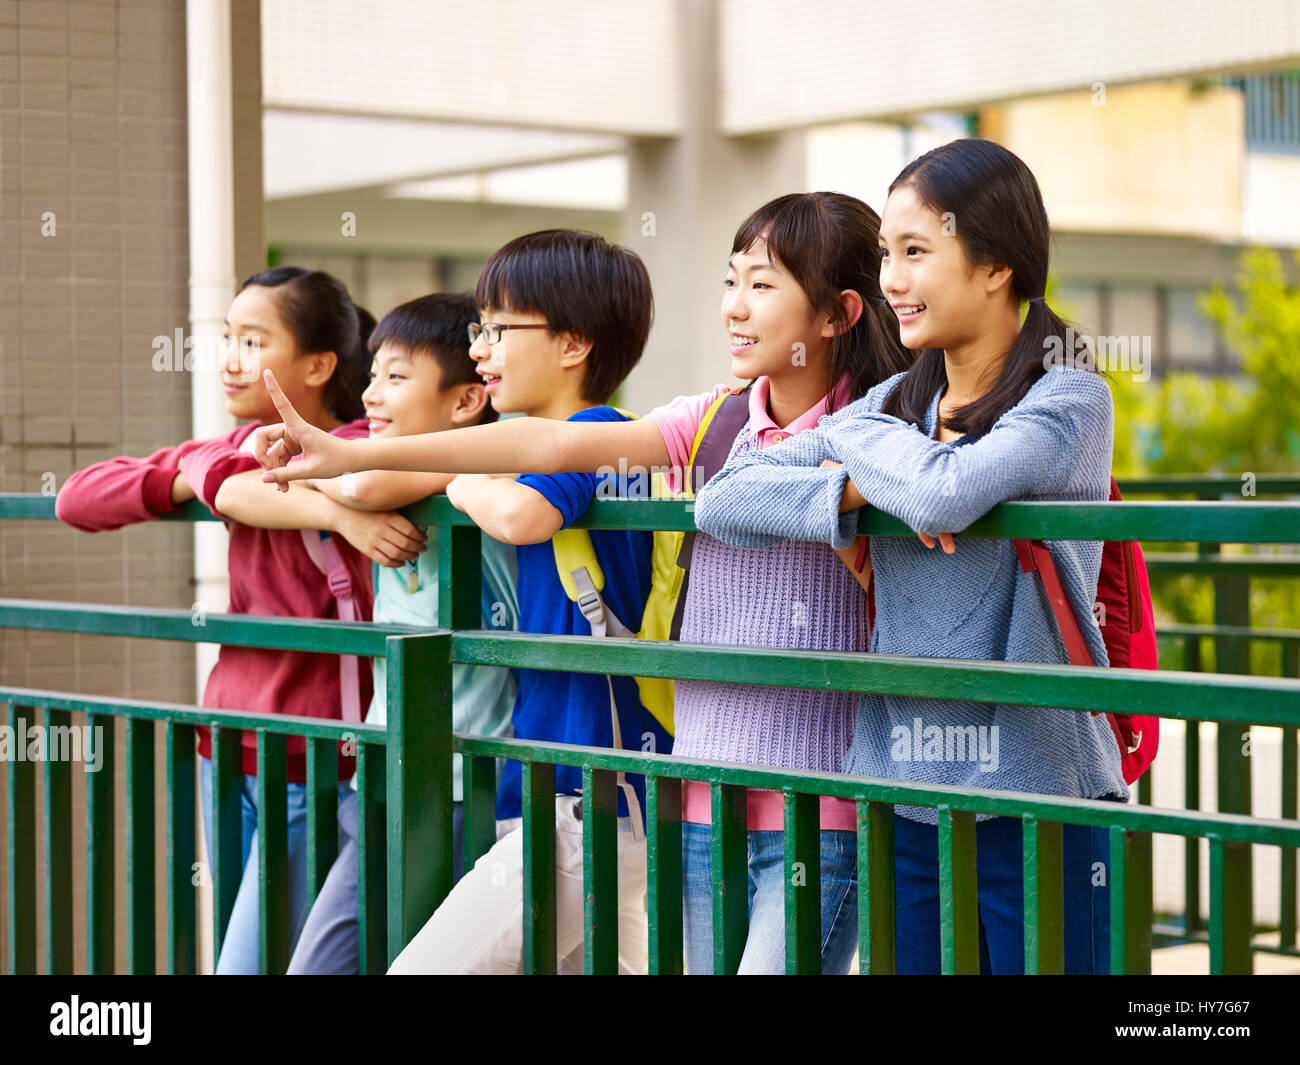 asian elementary school children having a good time together. Stock Photo